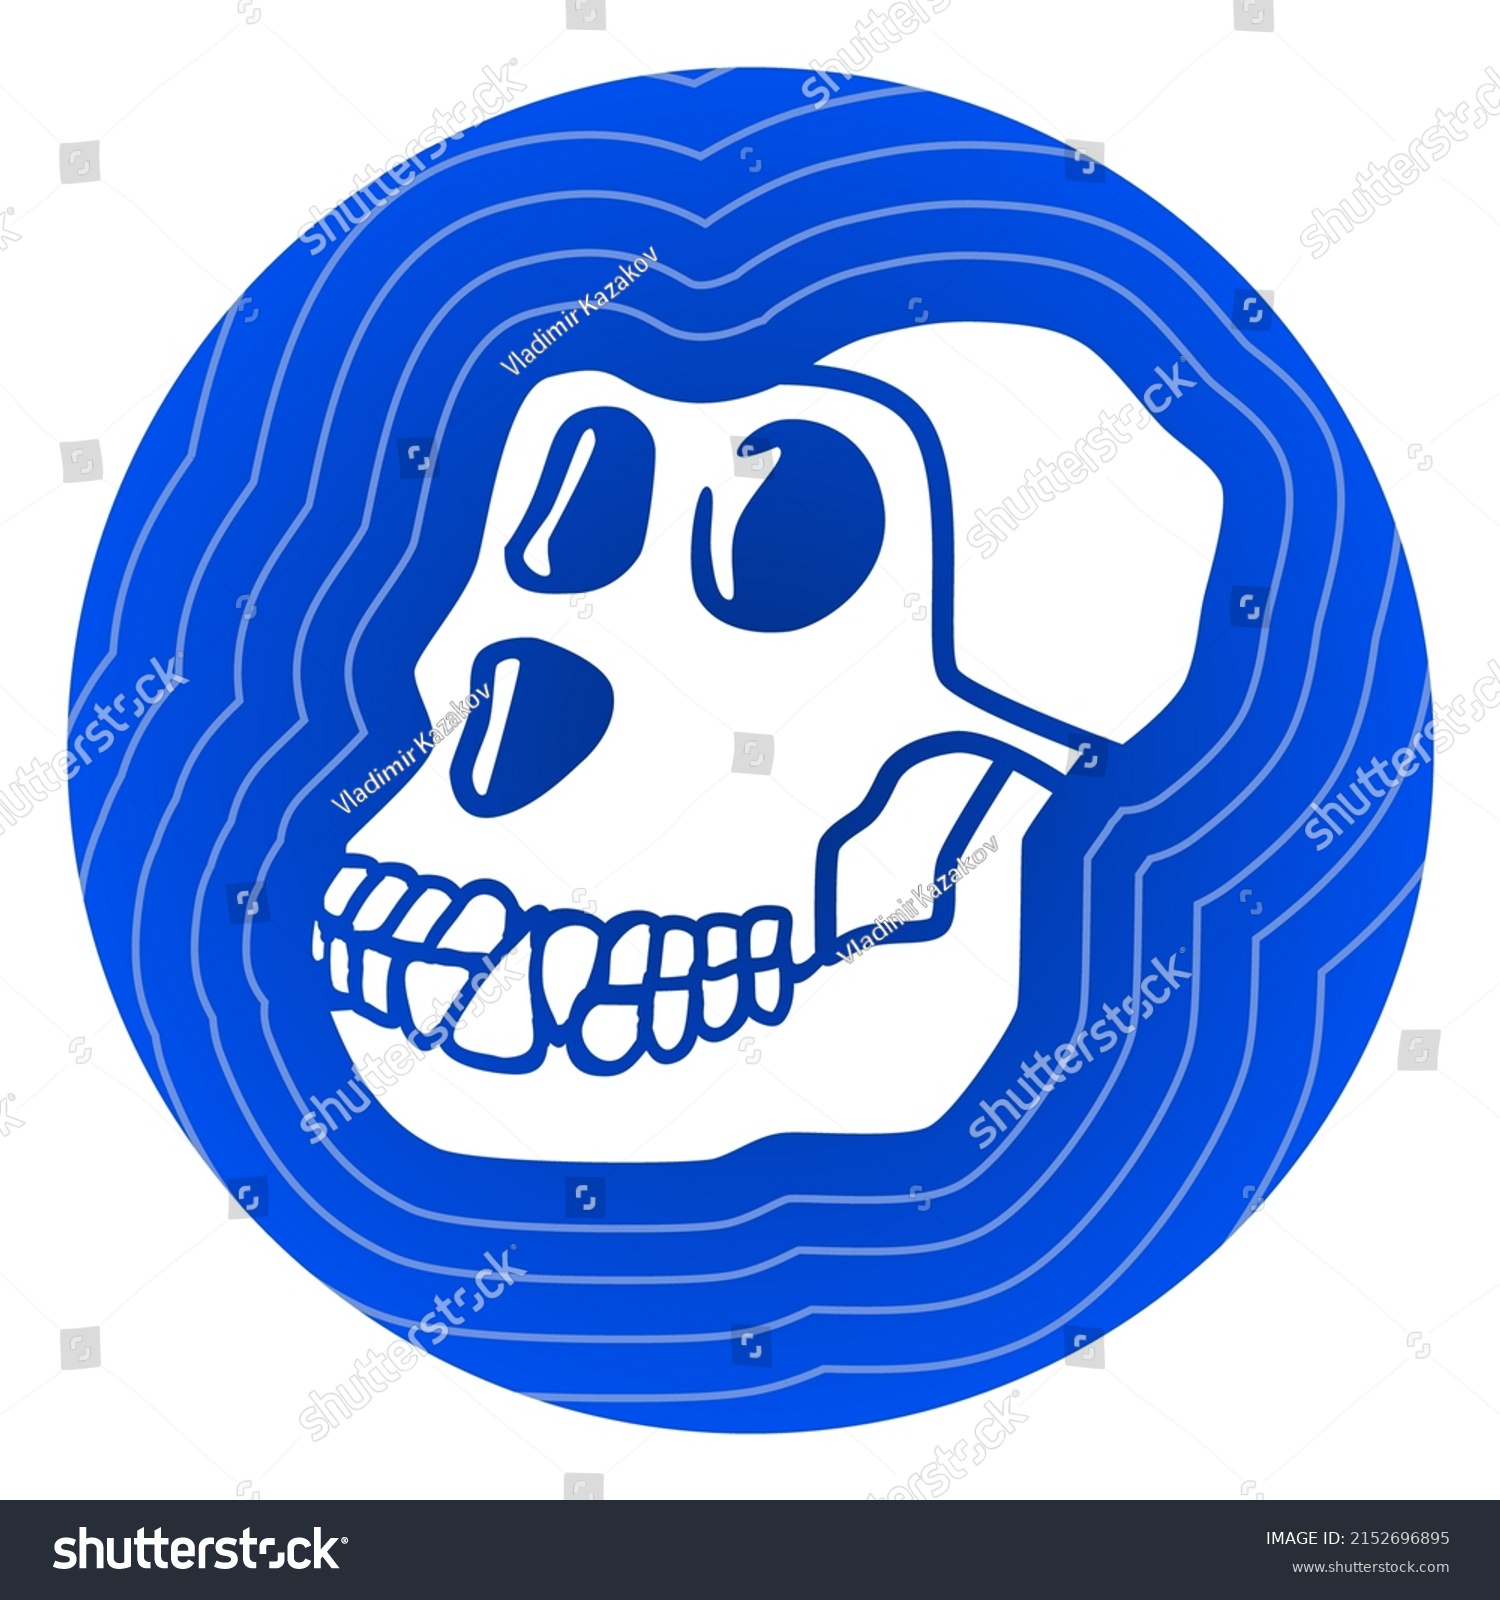 SVG of ApeCoin APE token symbol cryptocurrency logo coin icon in blue circle isolated on white background. Tokens allocated for BAYC and MAYC NFT holders for for WEB3 economy. Vector illustration. svg